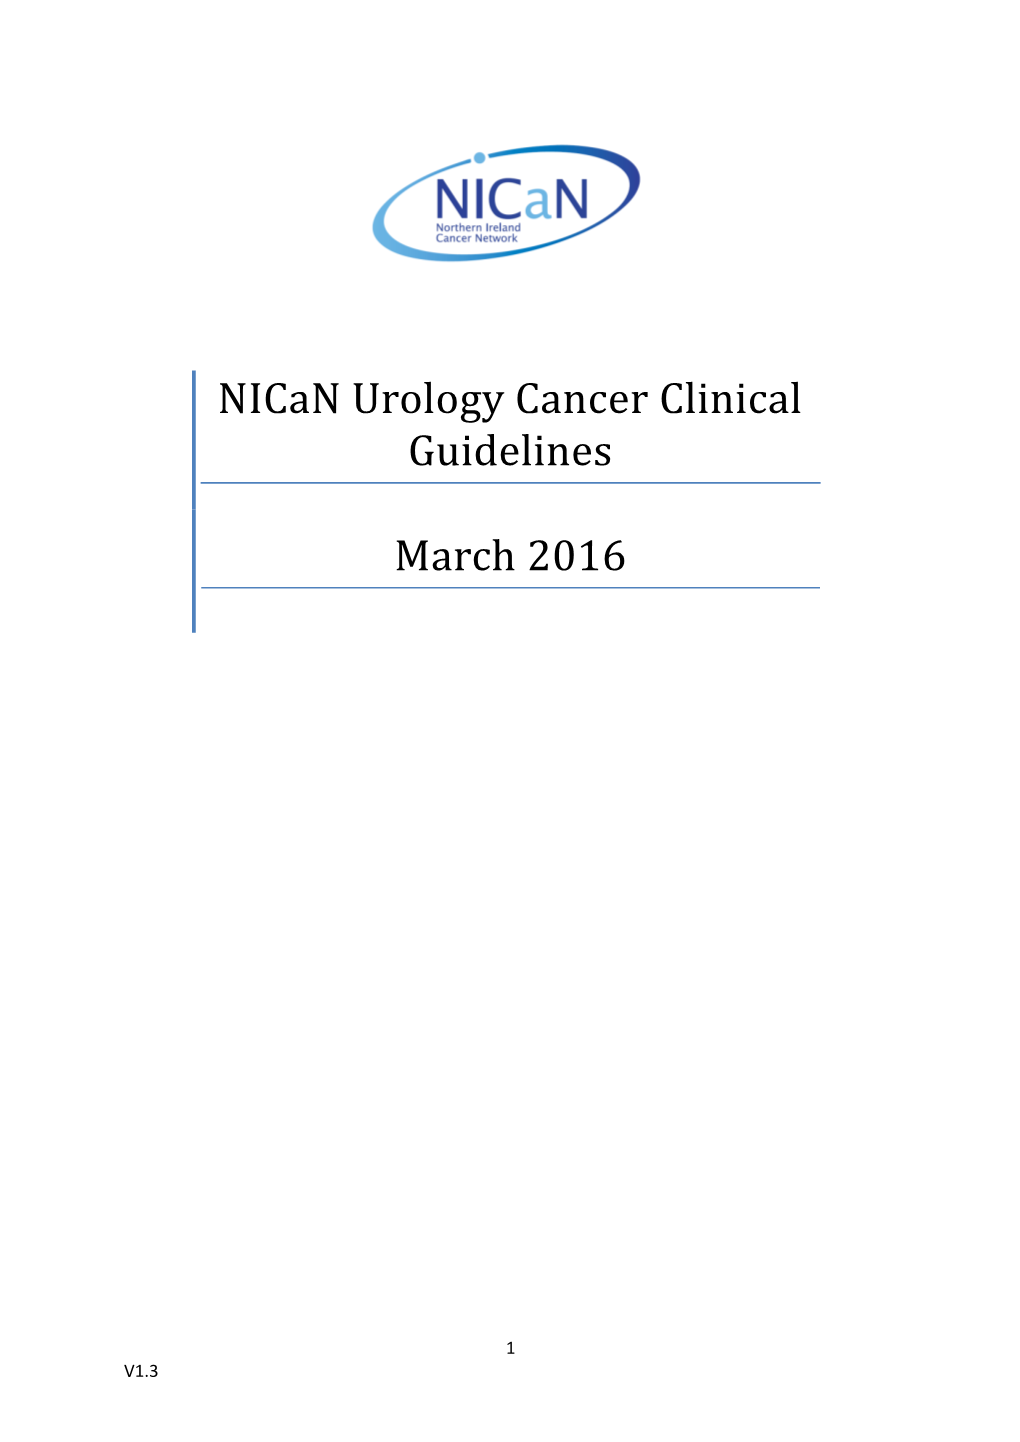 Nican Urology Cancer Clinical Guidelines March 2016